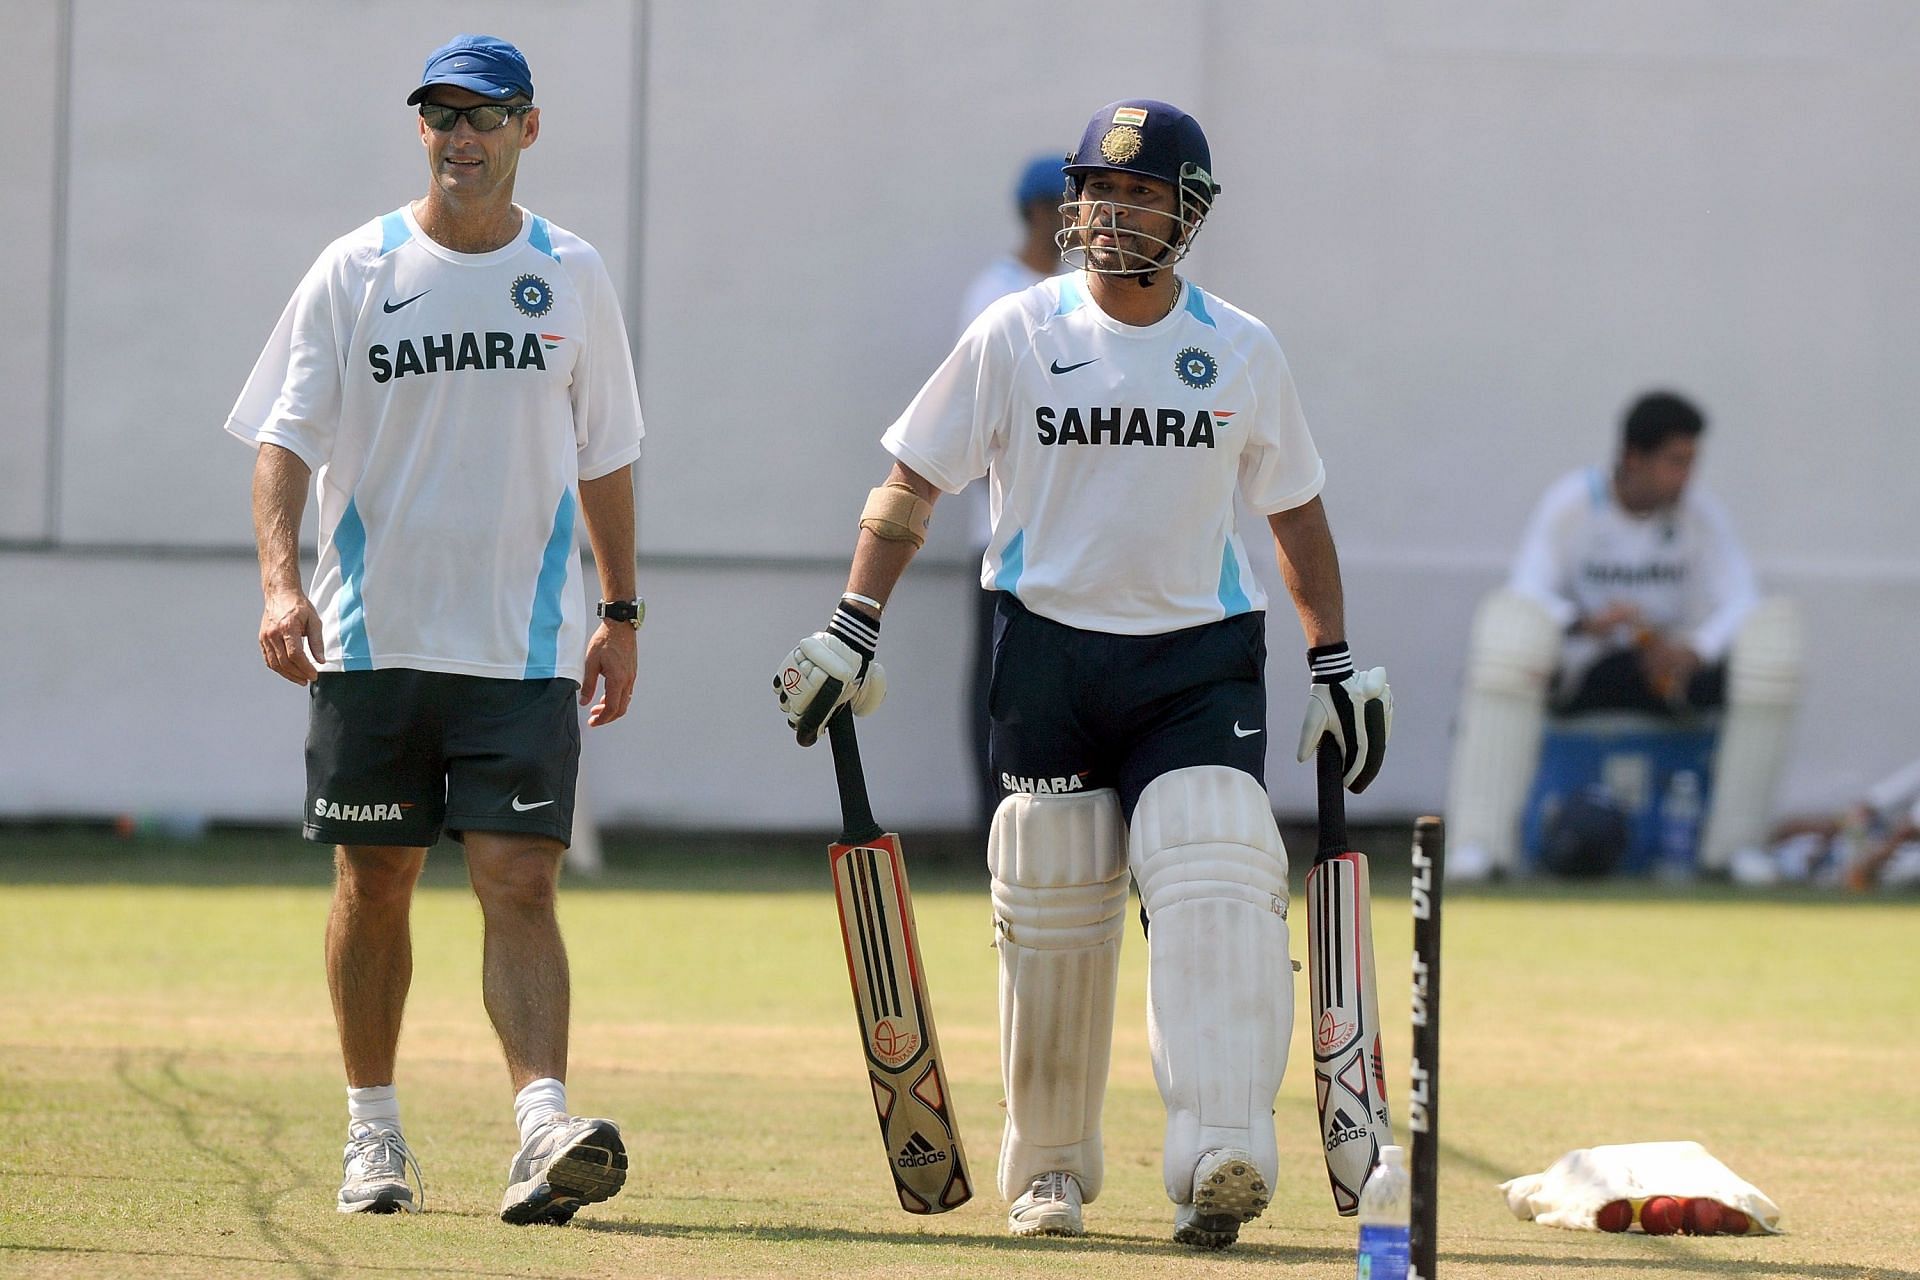 Tendulkar was deeply unhappy at the time that I joined the team” - Gary Kirsten opens up on dark phase in Indian cricket in 2007